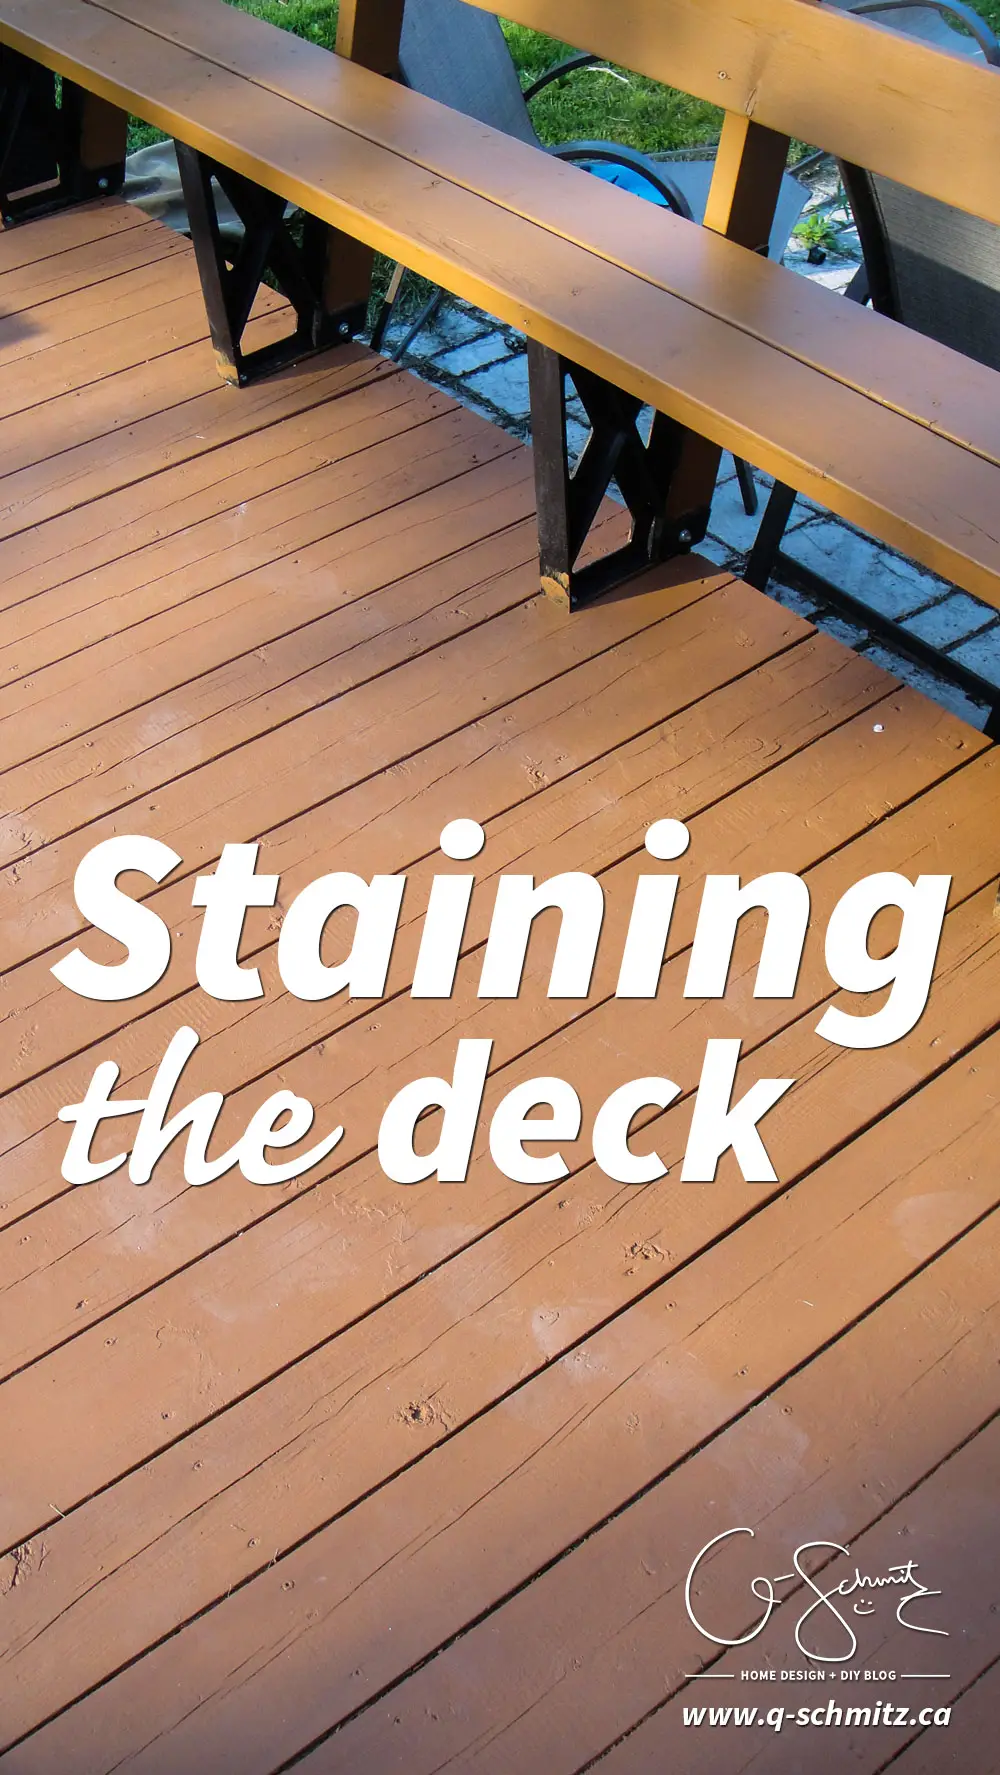 Staining the deck is an easy DIY project, but it is time consuming! Check out all the photos of the progress and read about the details on how to stain different angles. I can't wait to host some great backyard barbecue parties!